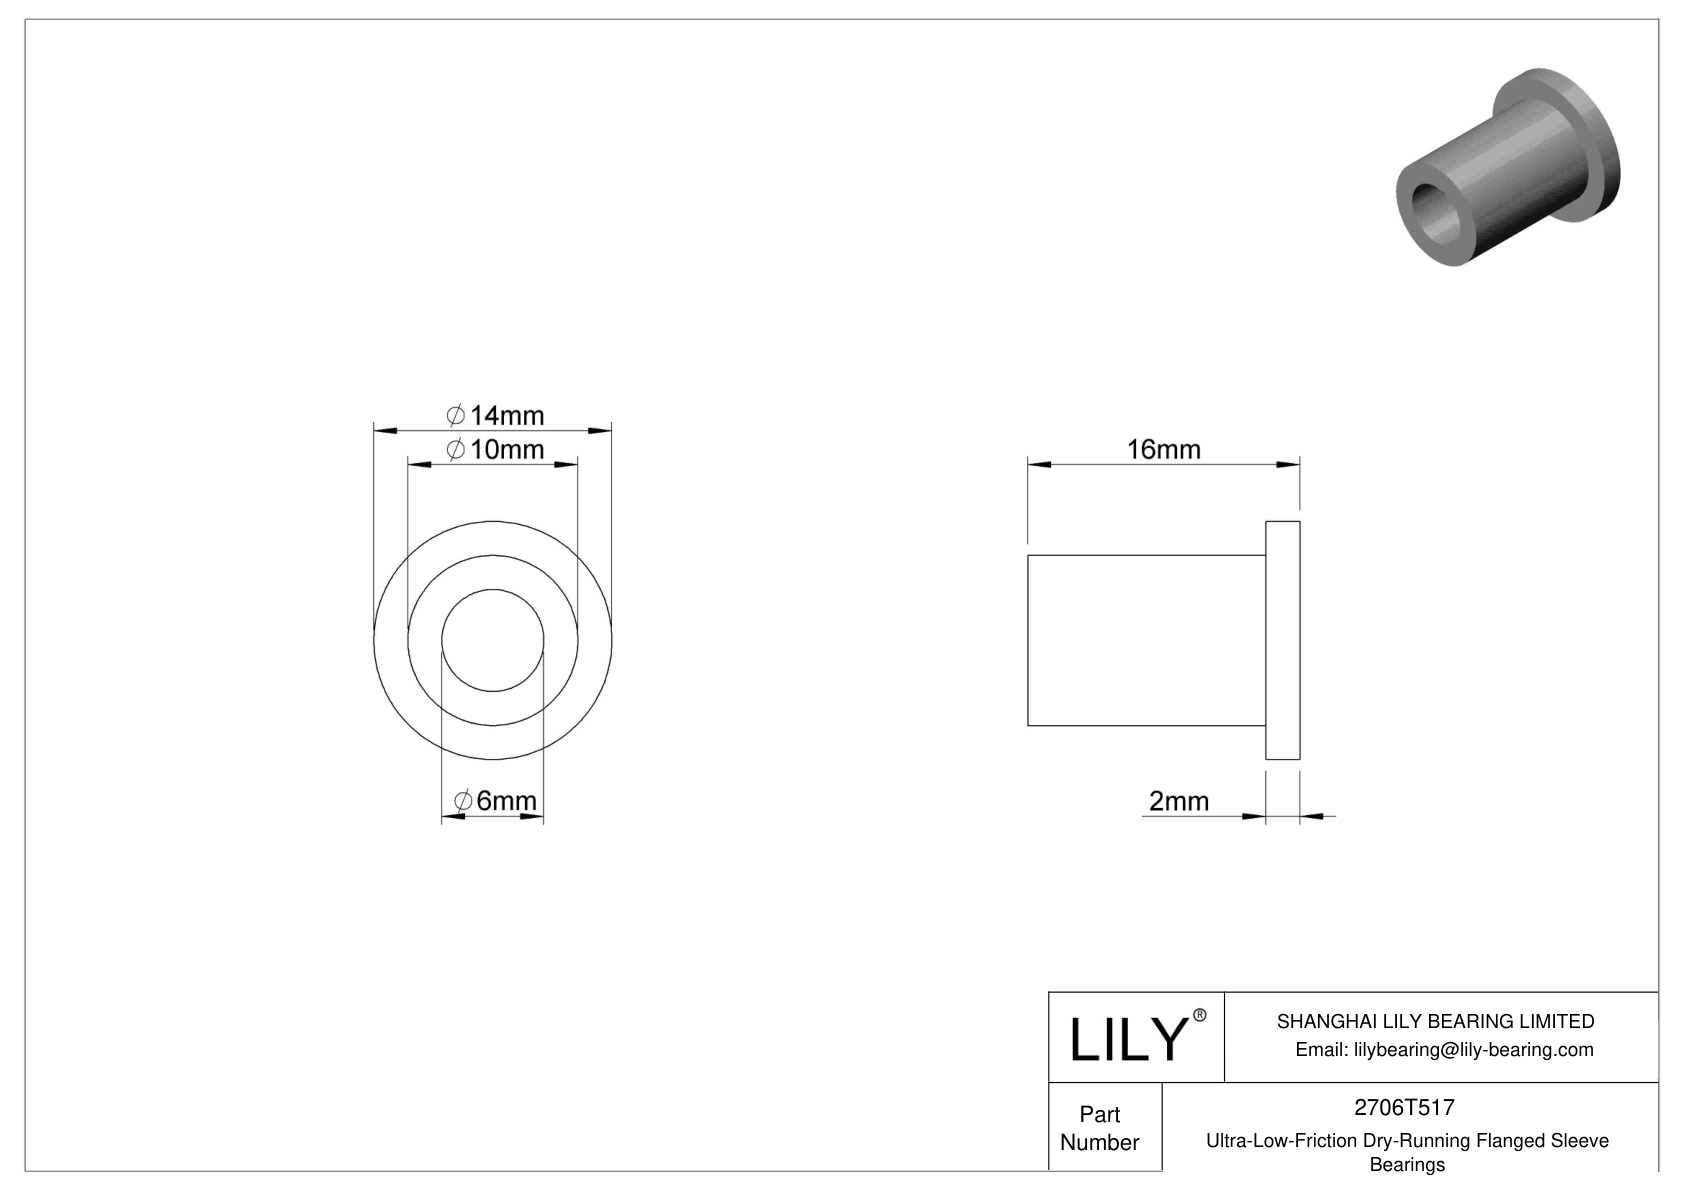 CHAGTFBH Ultra-Low-Friction Dry-Running Flanged Sleeve Bearings cad drawing